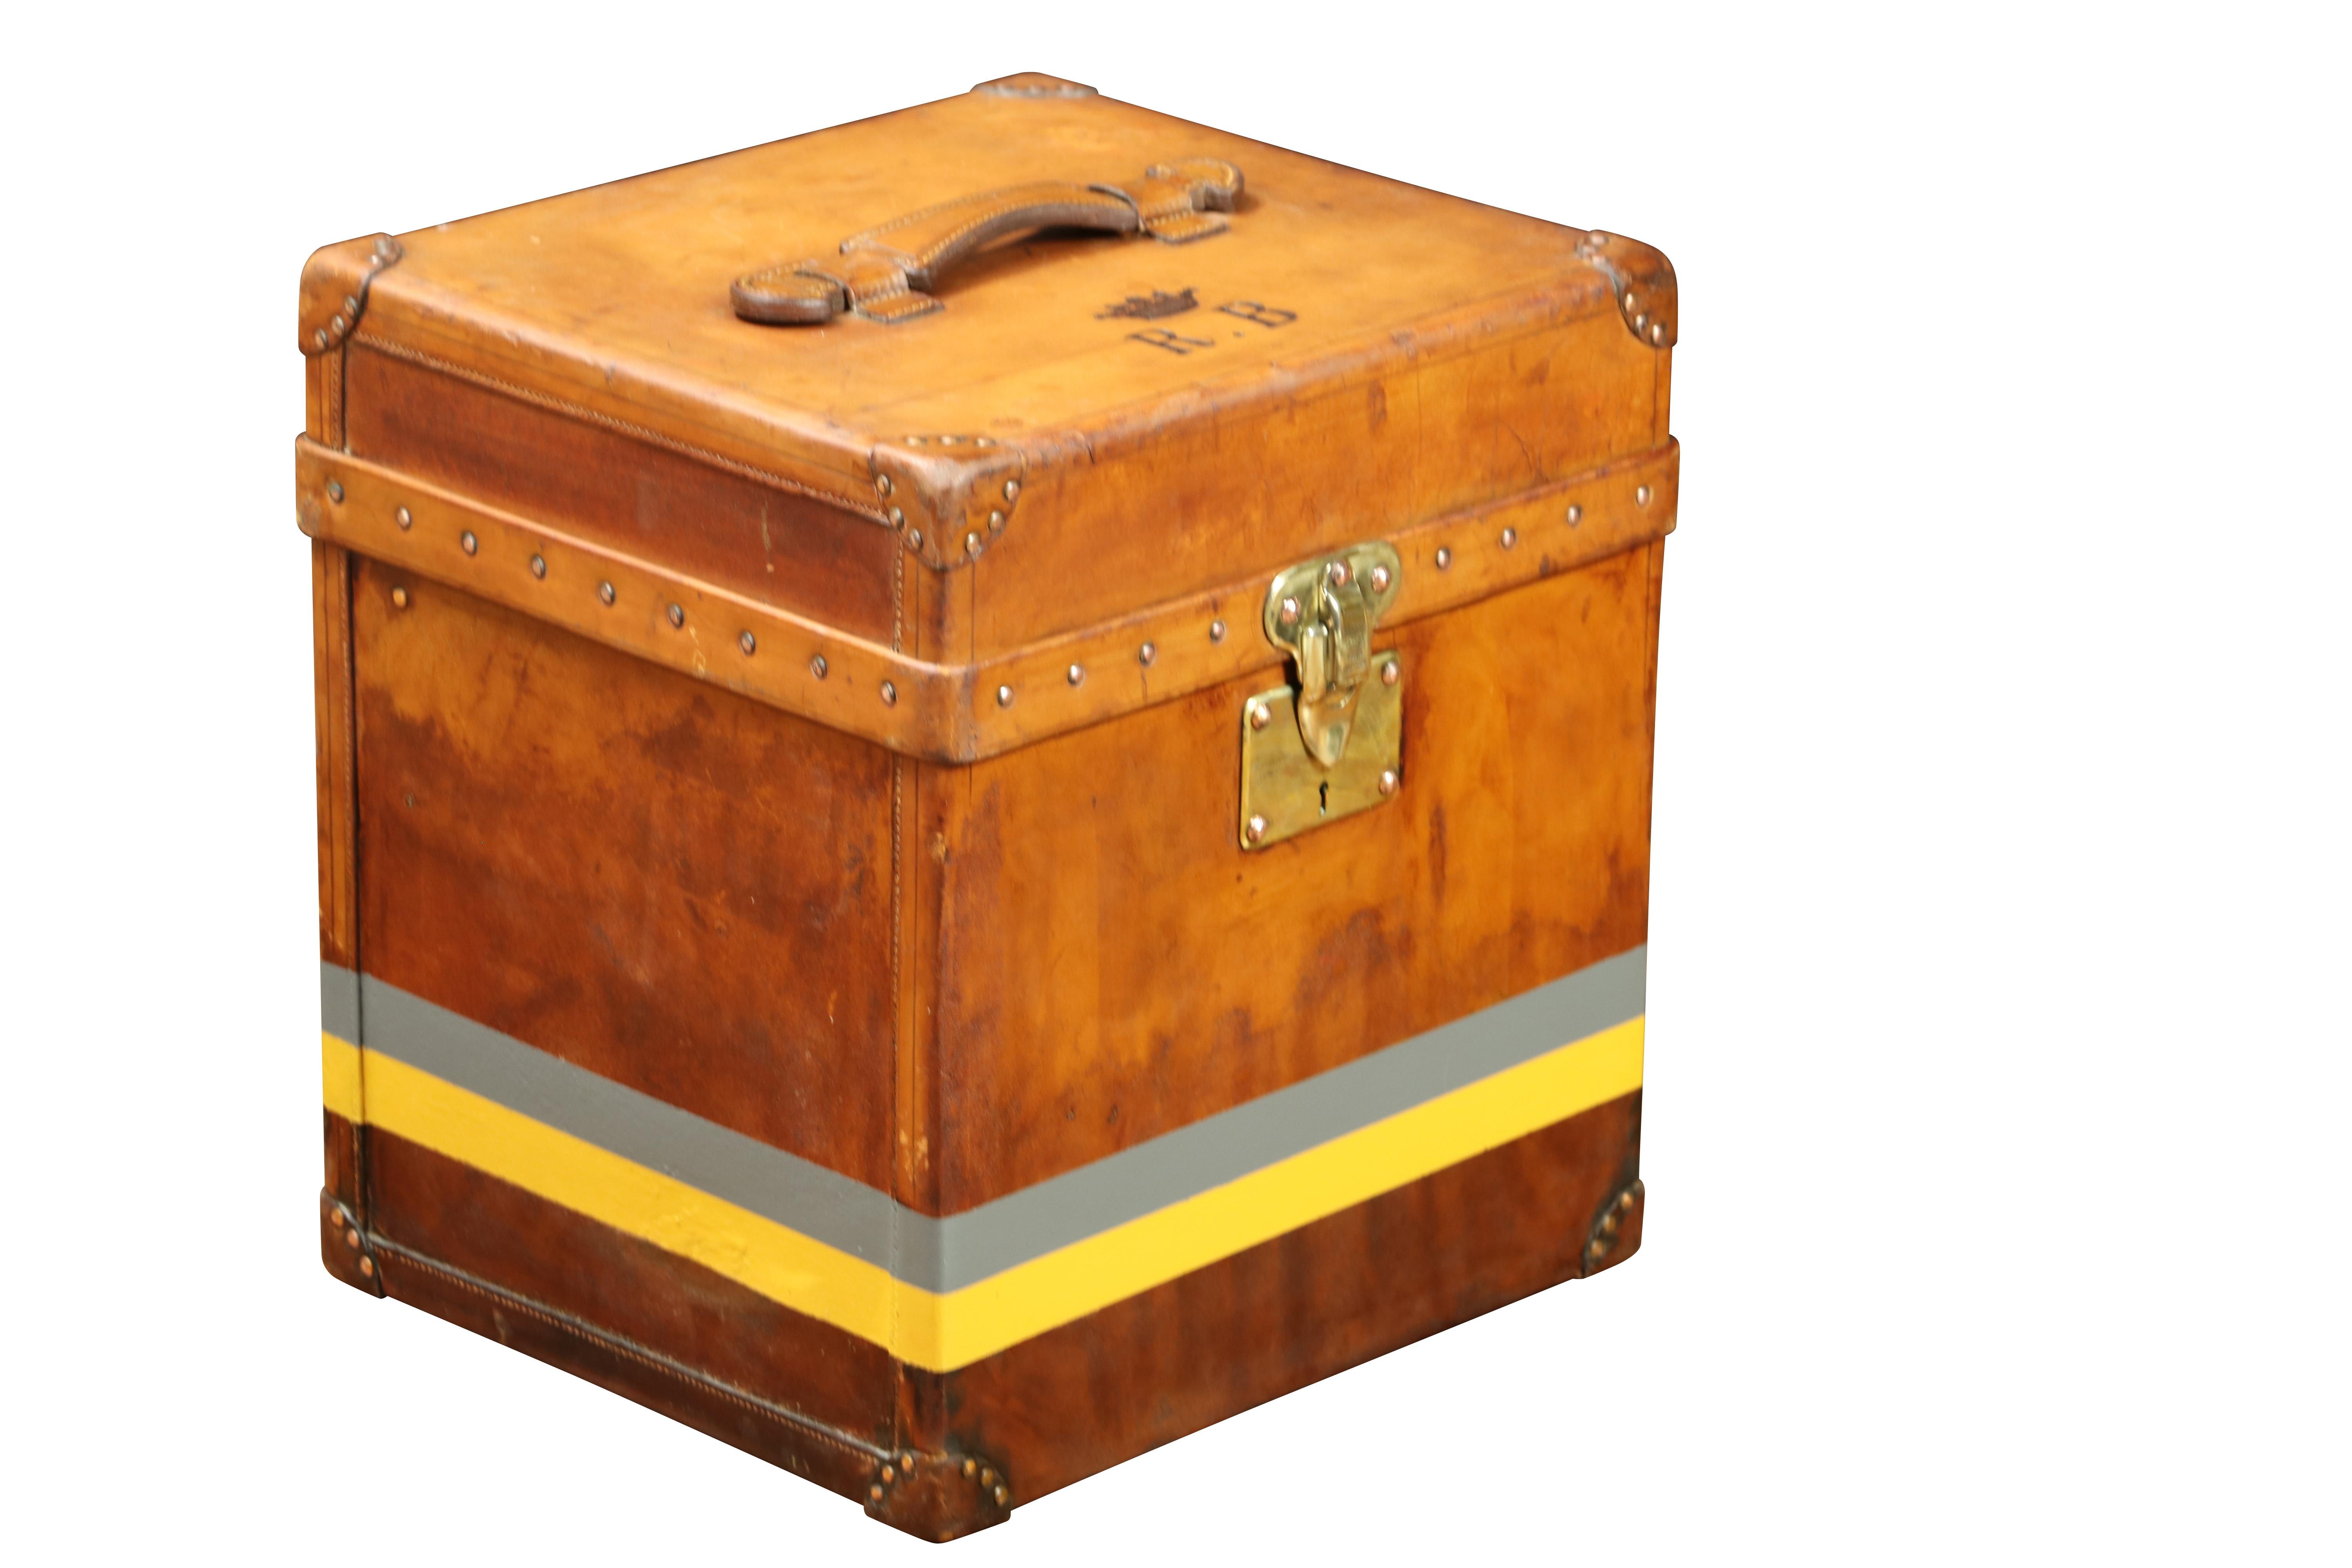 LOUIS VUITTON

Rare Trunk with hat man in natural leather with monogram R.B and crown, leather handle.

• Its jewellery is made of solid brass (lock and nails). Lock no. 028048.
• The structure is made of poplar wood, covered with natural leather.